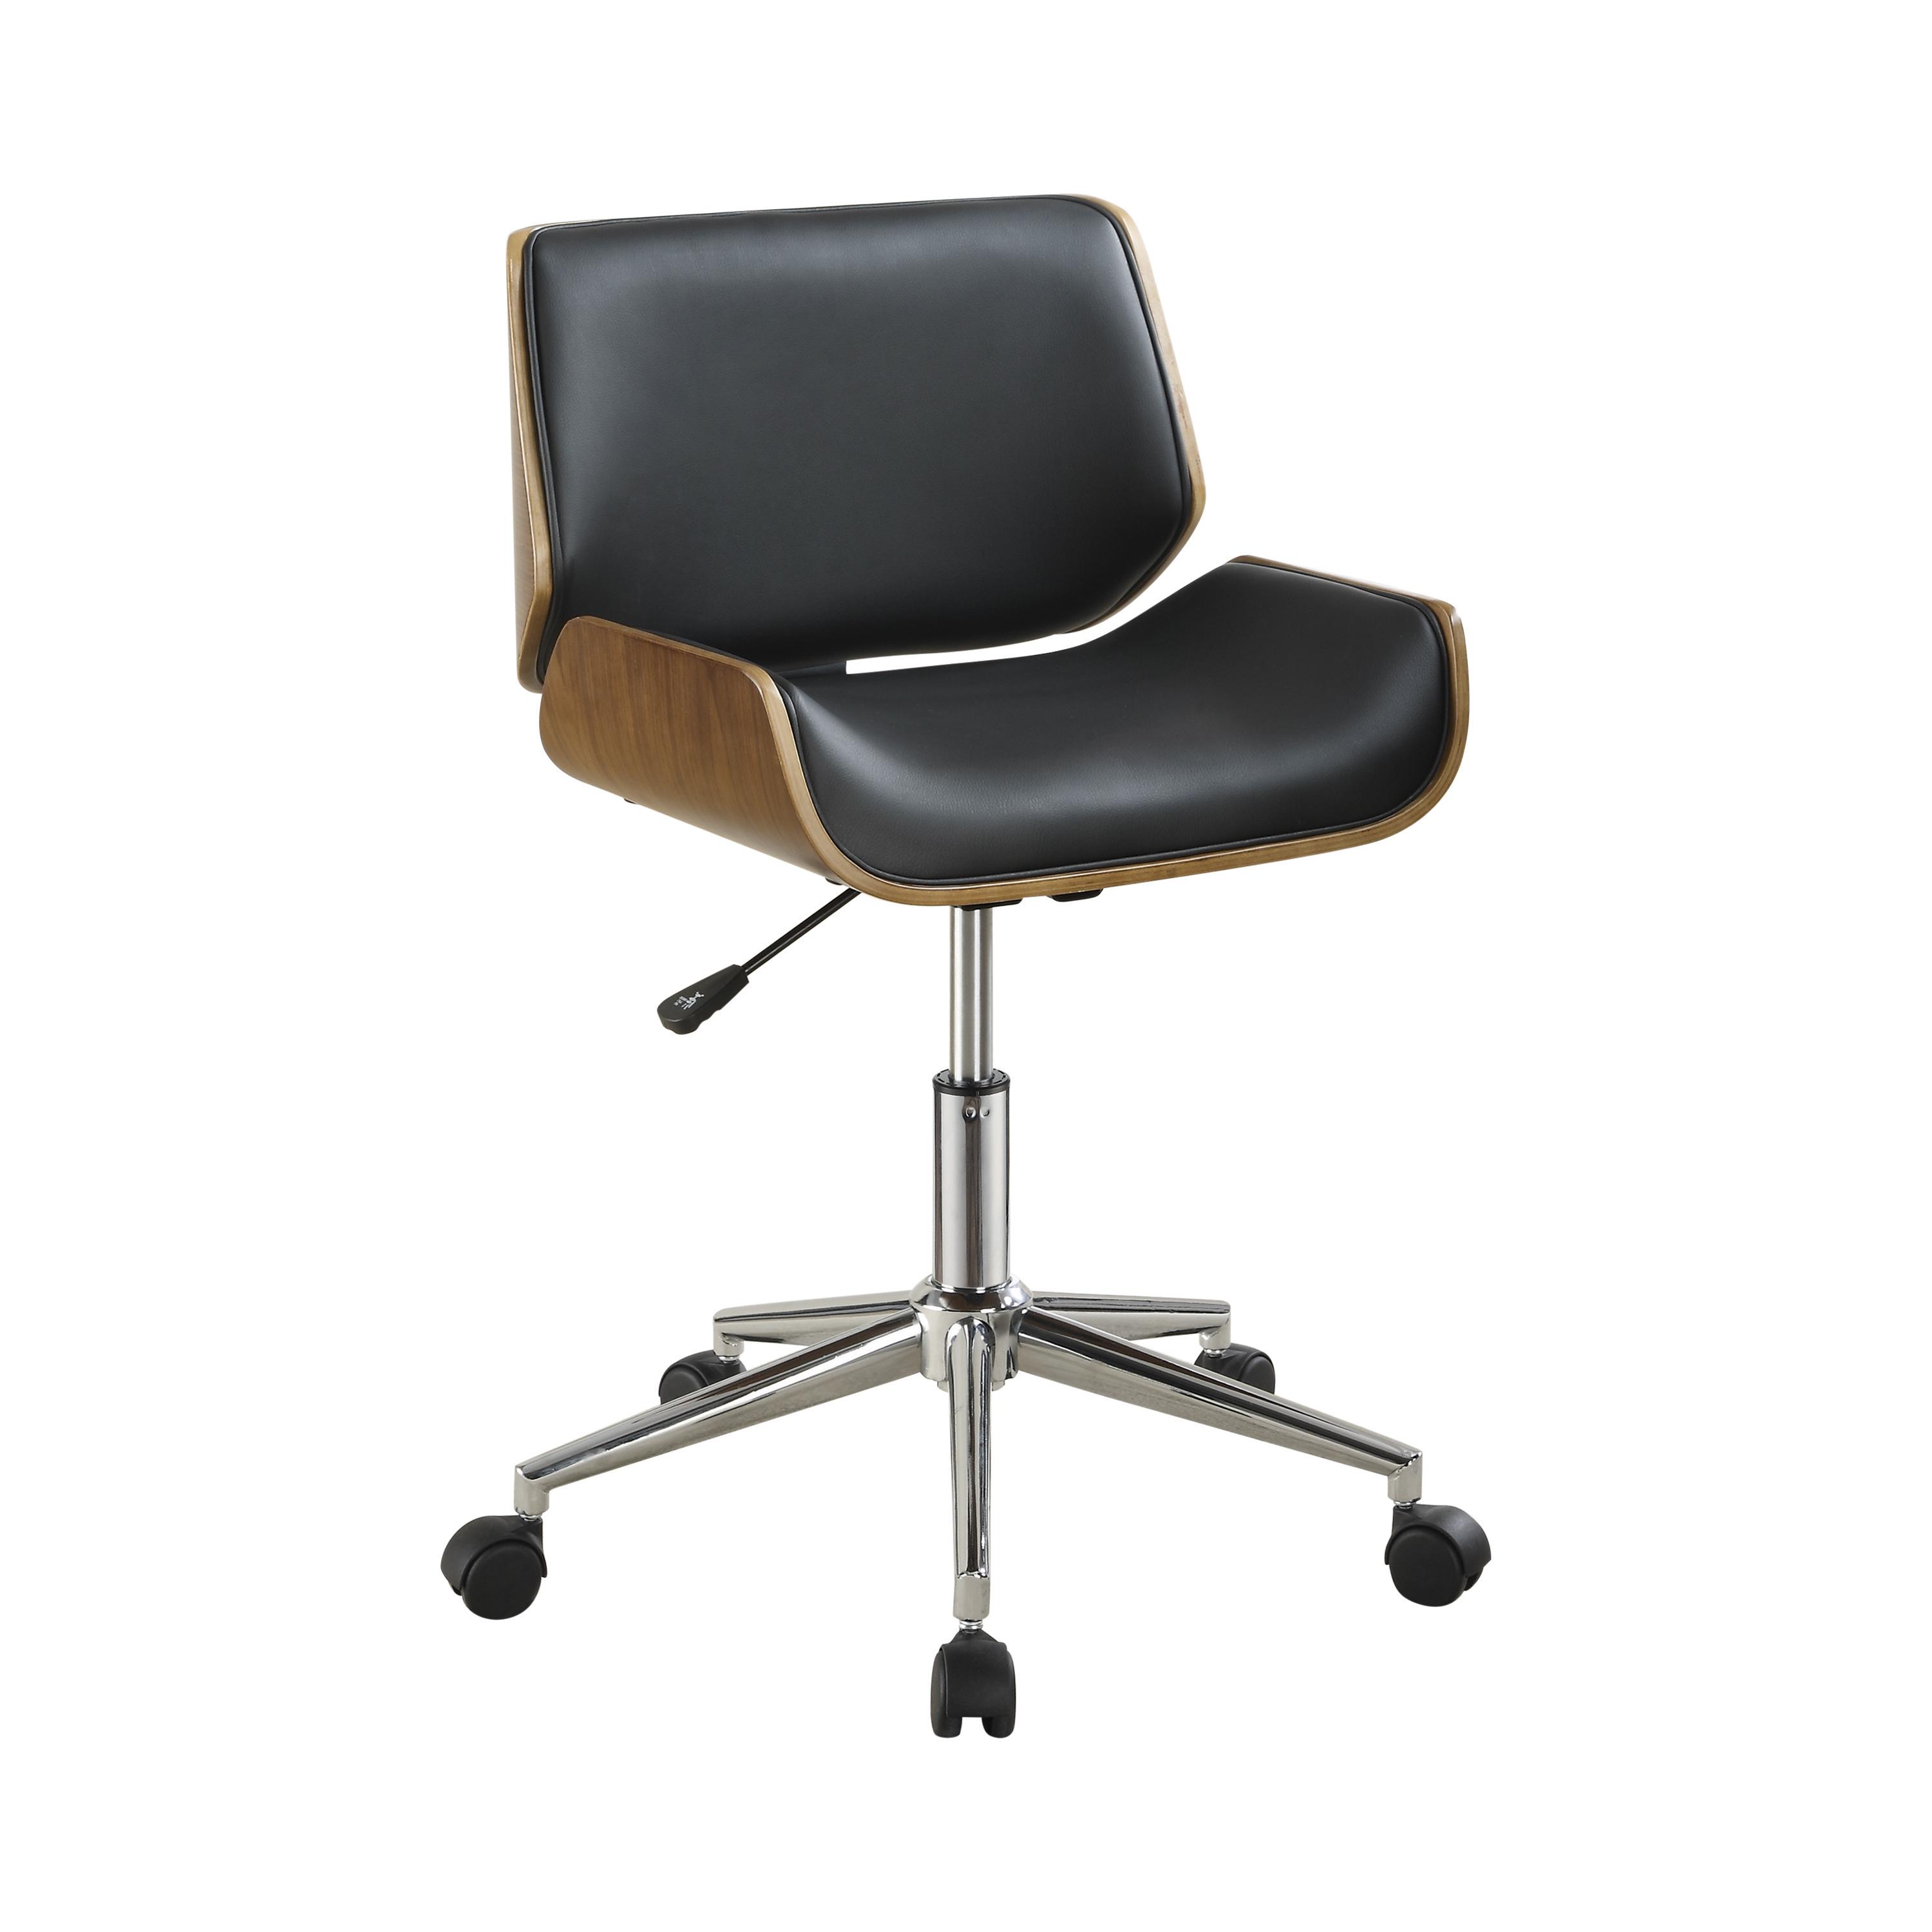 Modern Office Chair 800612 800612 in Black Leatherette